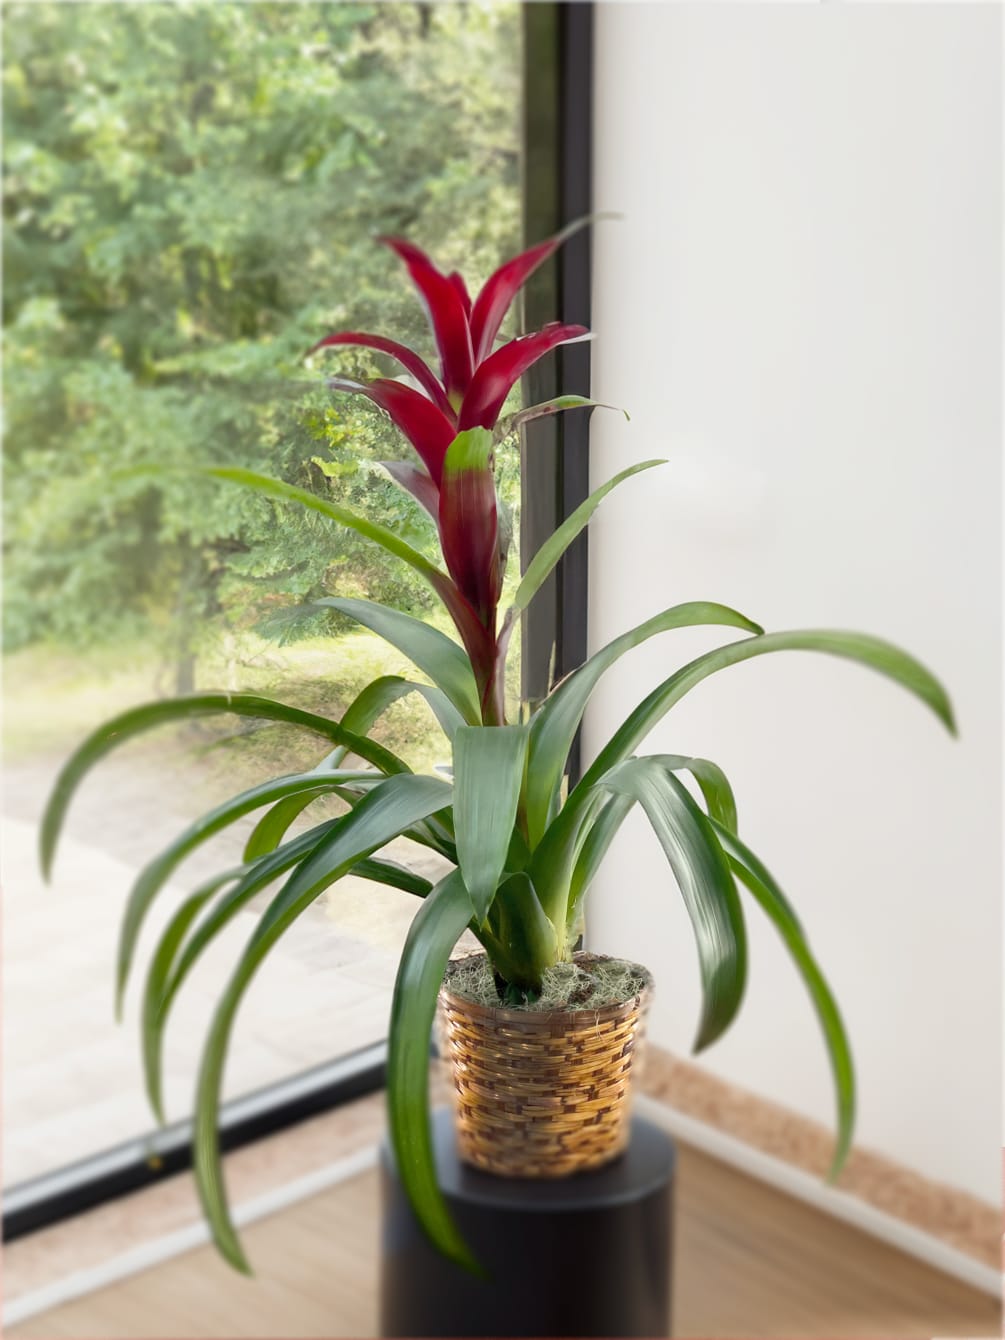 The Bromeliad Plants come in a wicker basket or ceramic containers (upgraded